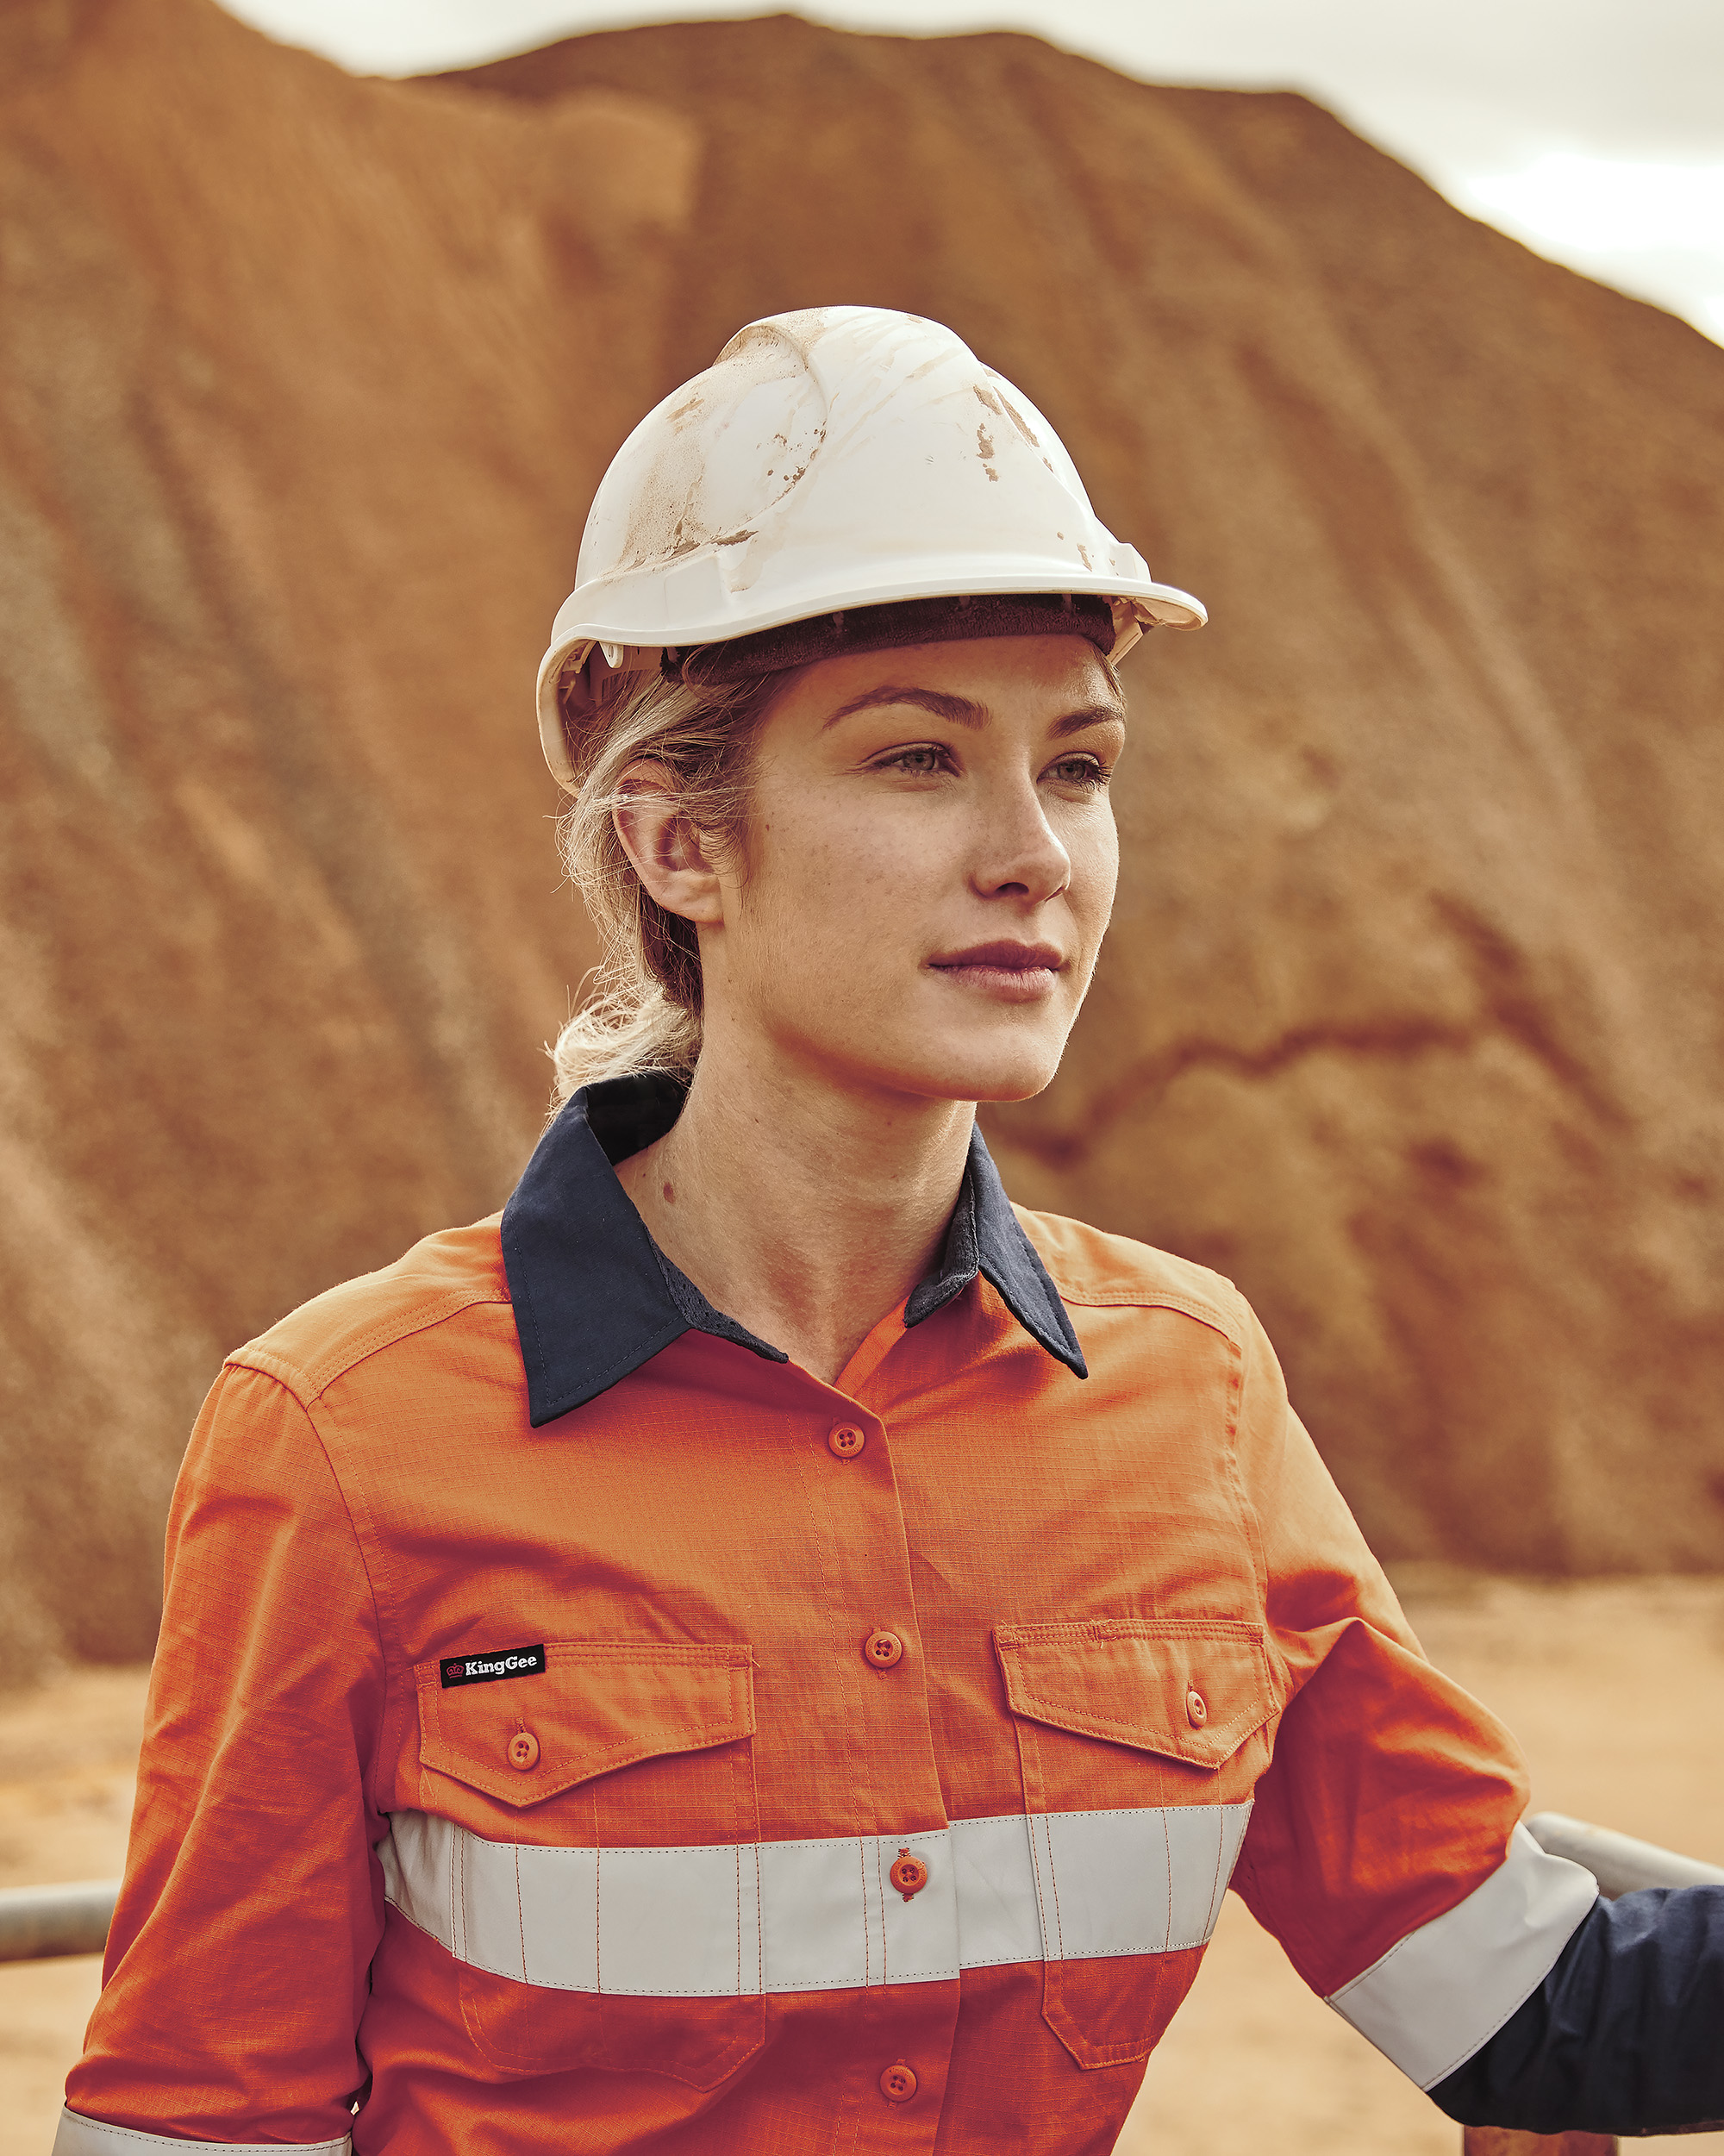 campaign-thom-rigney-professional-photographer-advertising-commissioned-workwear-construction-australia-002